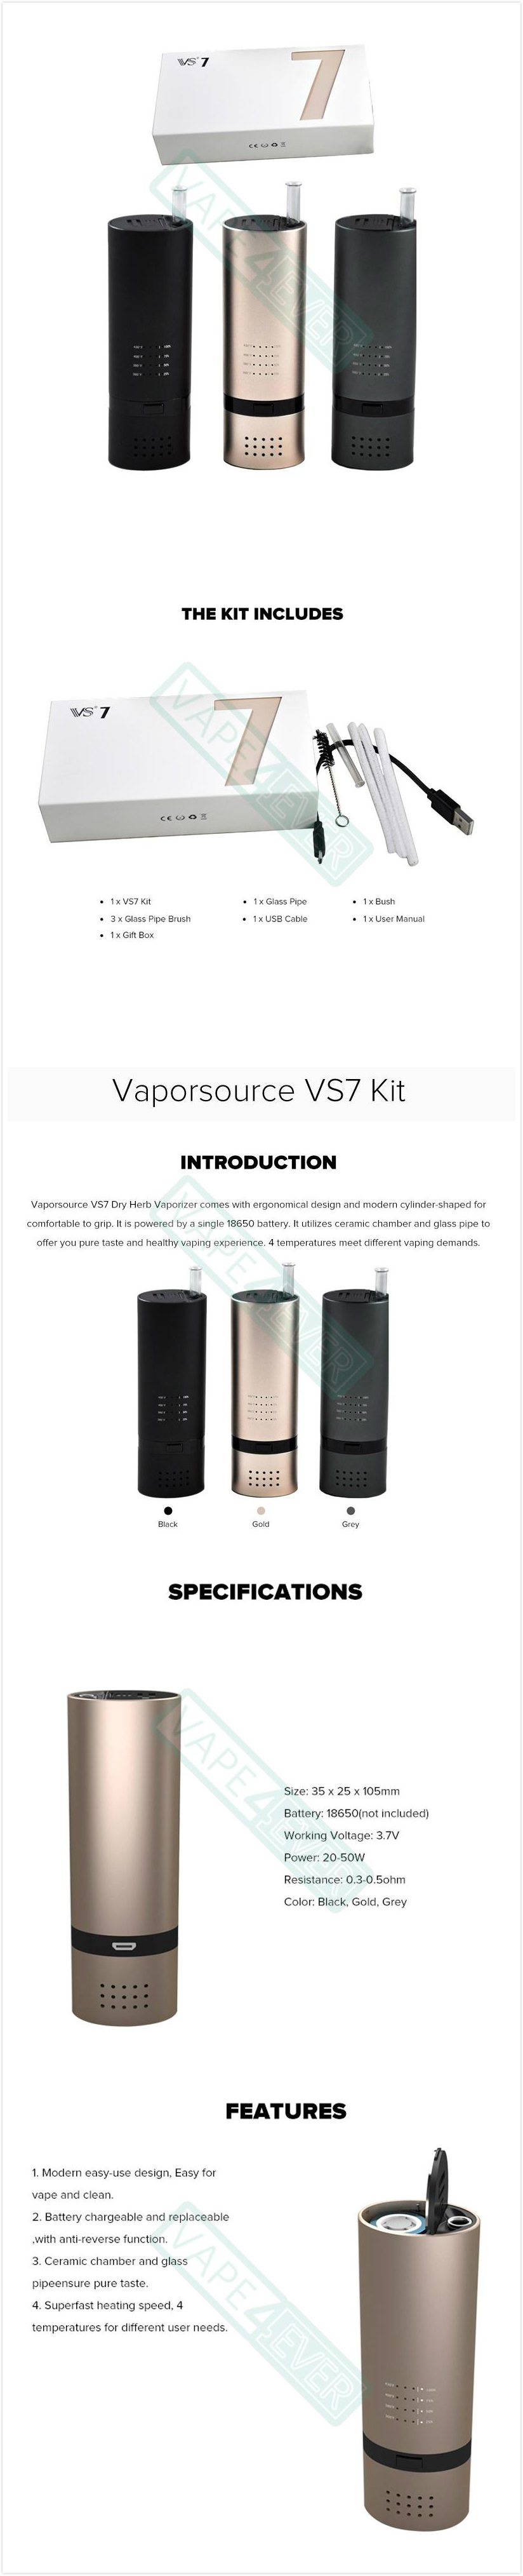 Vaporsource VS7 Vaporizer Kit TC Control For Dry Herb With Ceramic Chamber&Glass Pipe Instruction